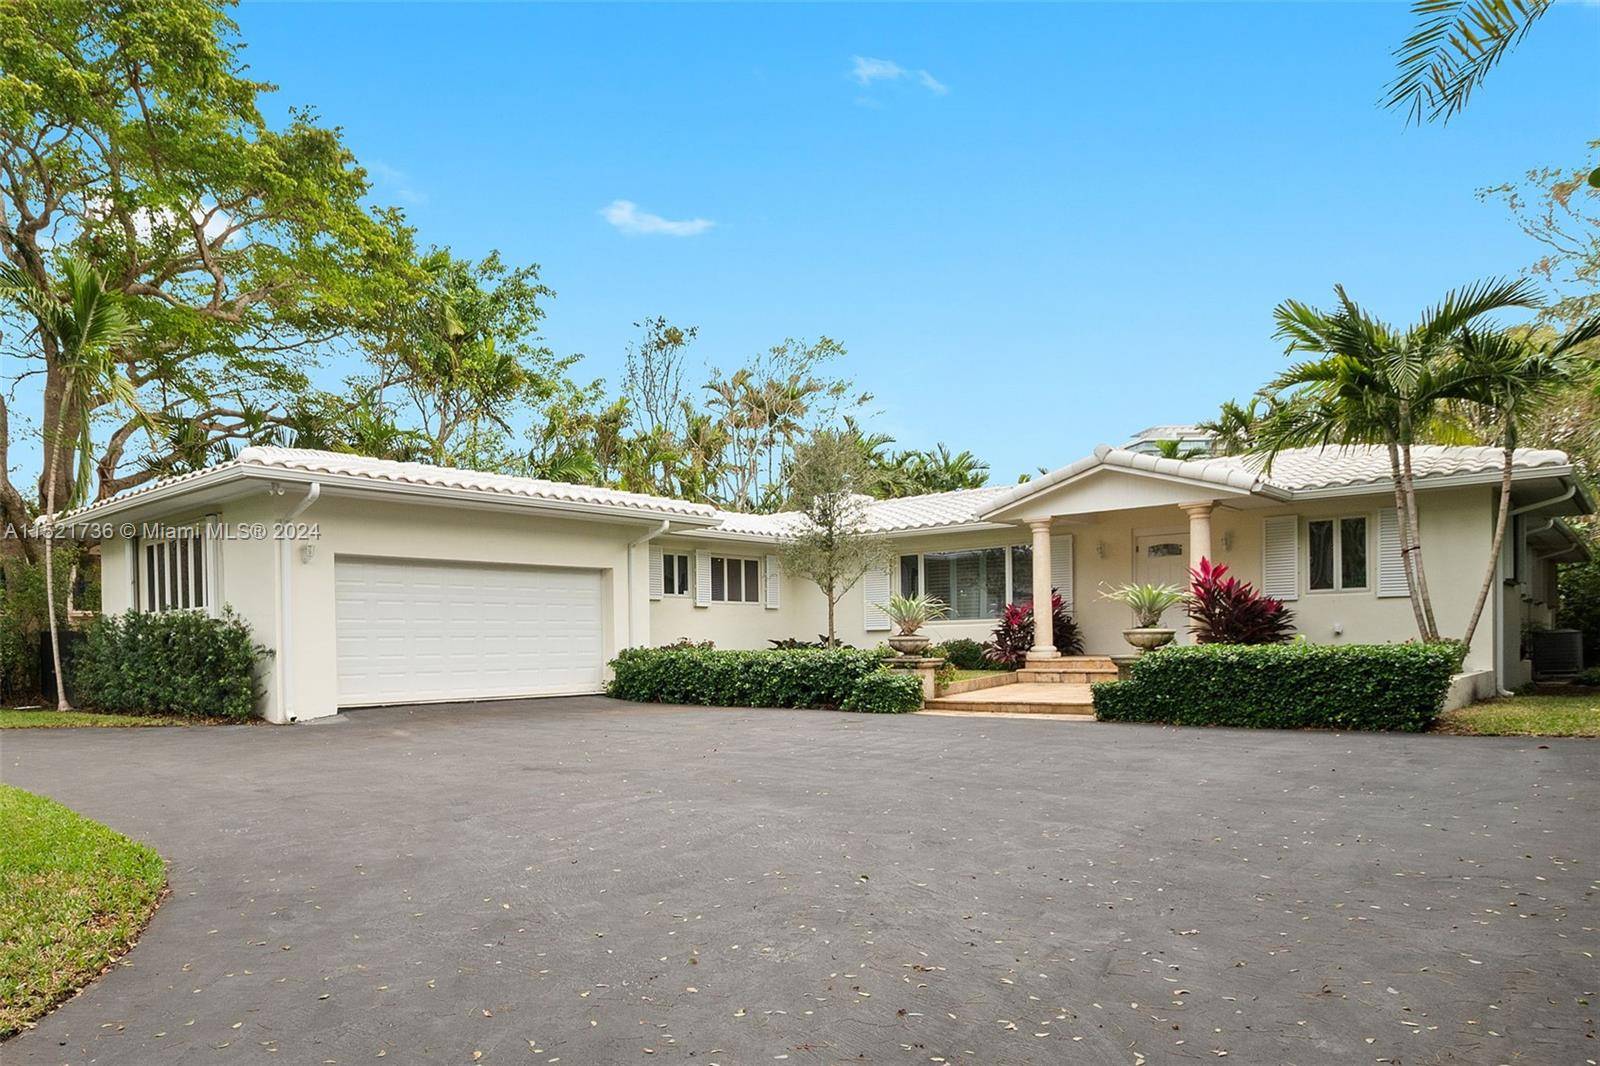 Spacious charming single story home located in the desirable exclusive Bal Harbour Village.